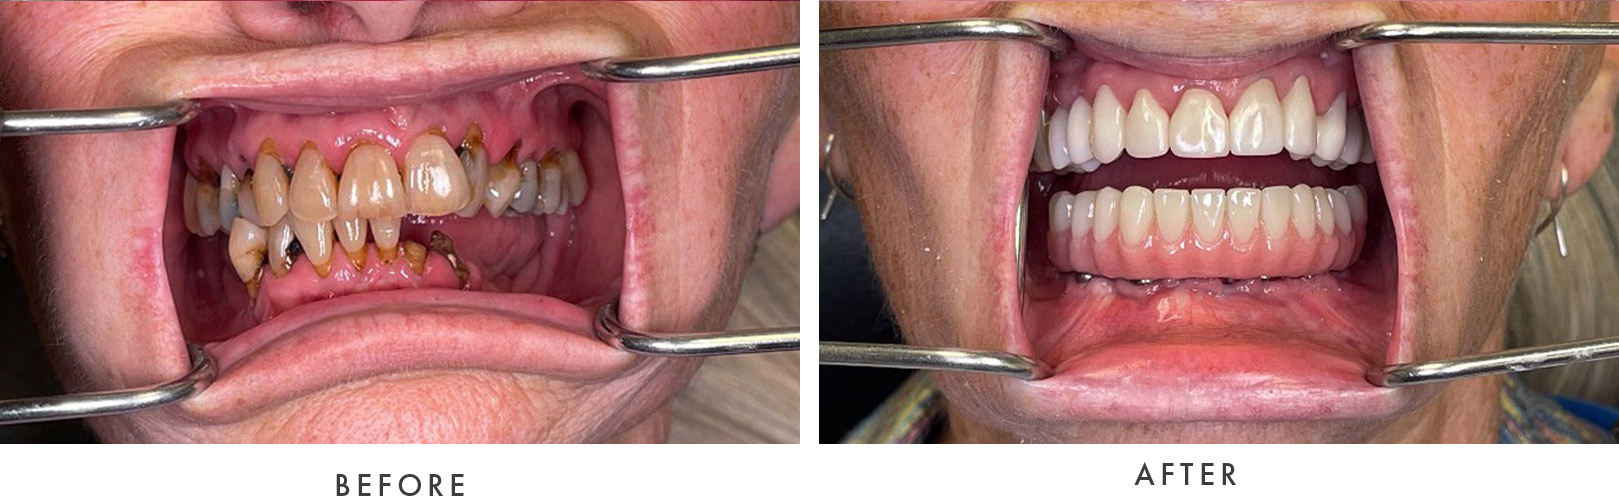 Wellington Family Dentistry & Implant Center before and after example model